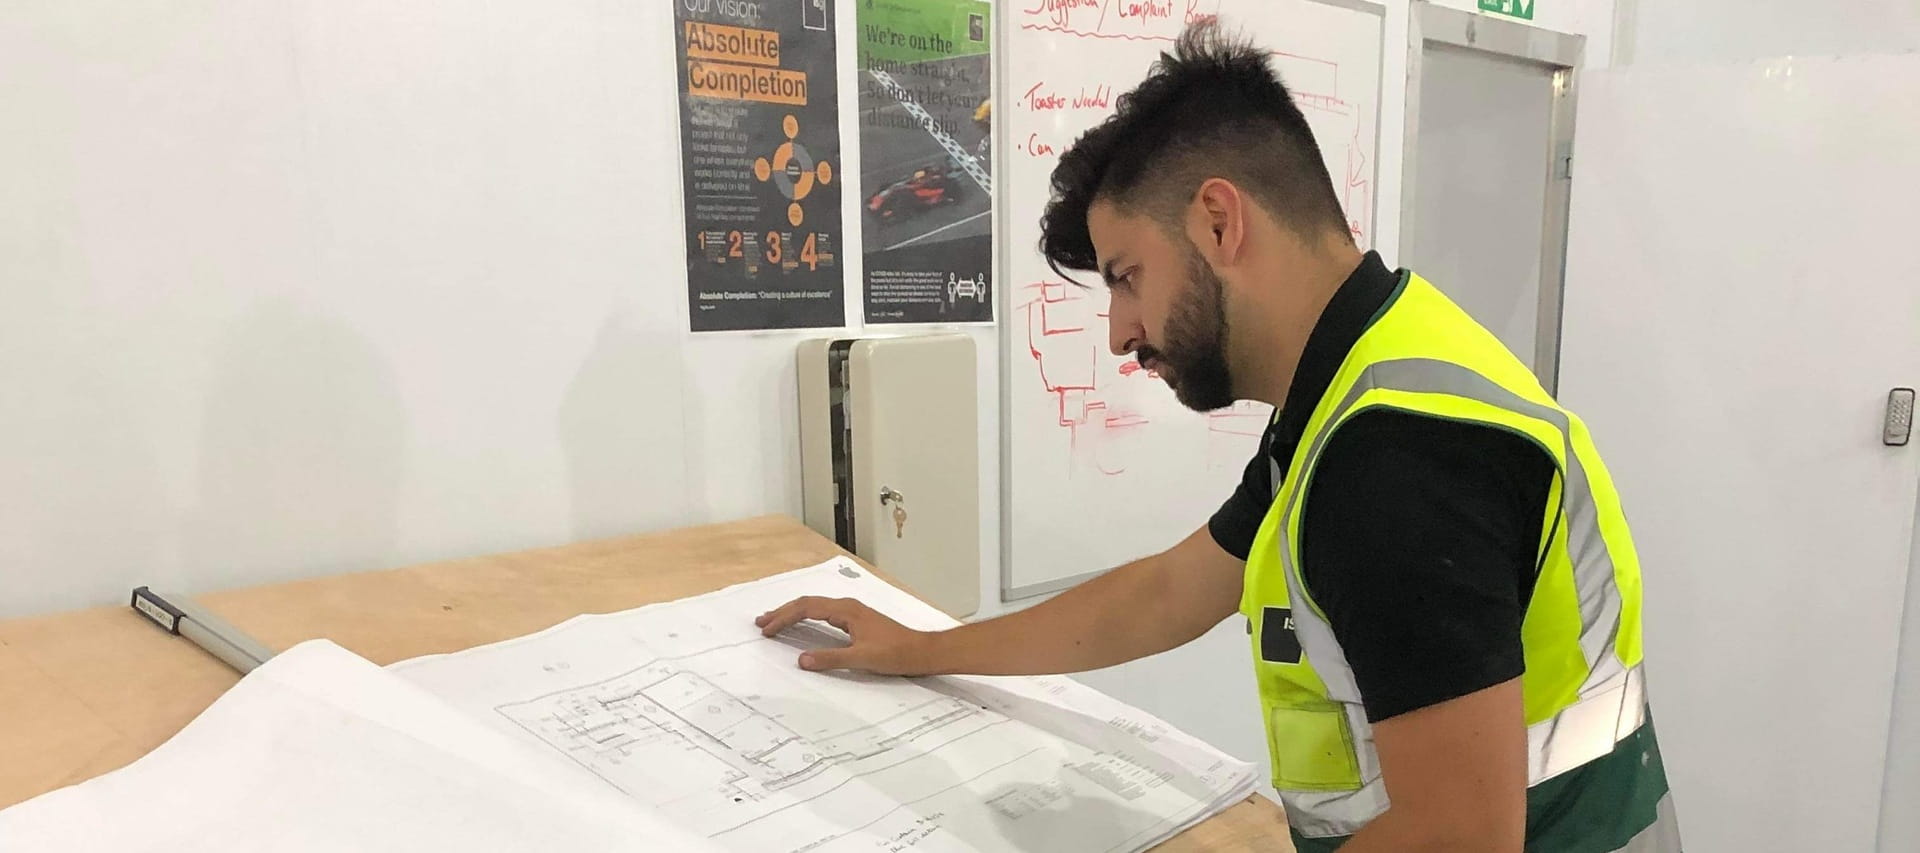 ISG Construction graduate Alex Riley in High vis looking at plans on table